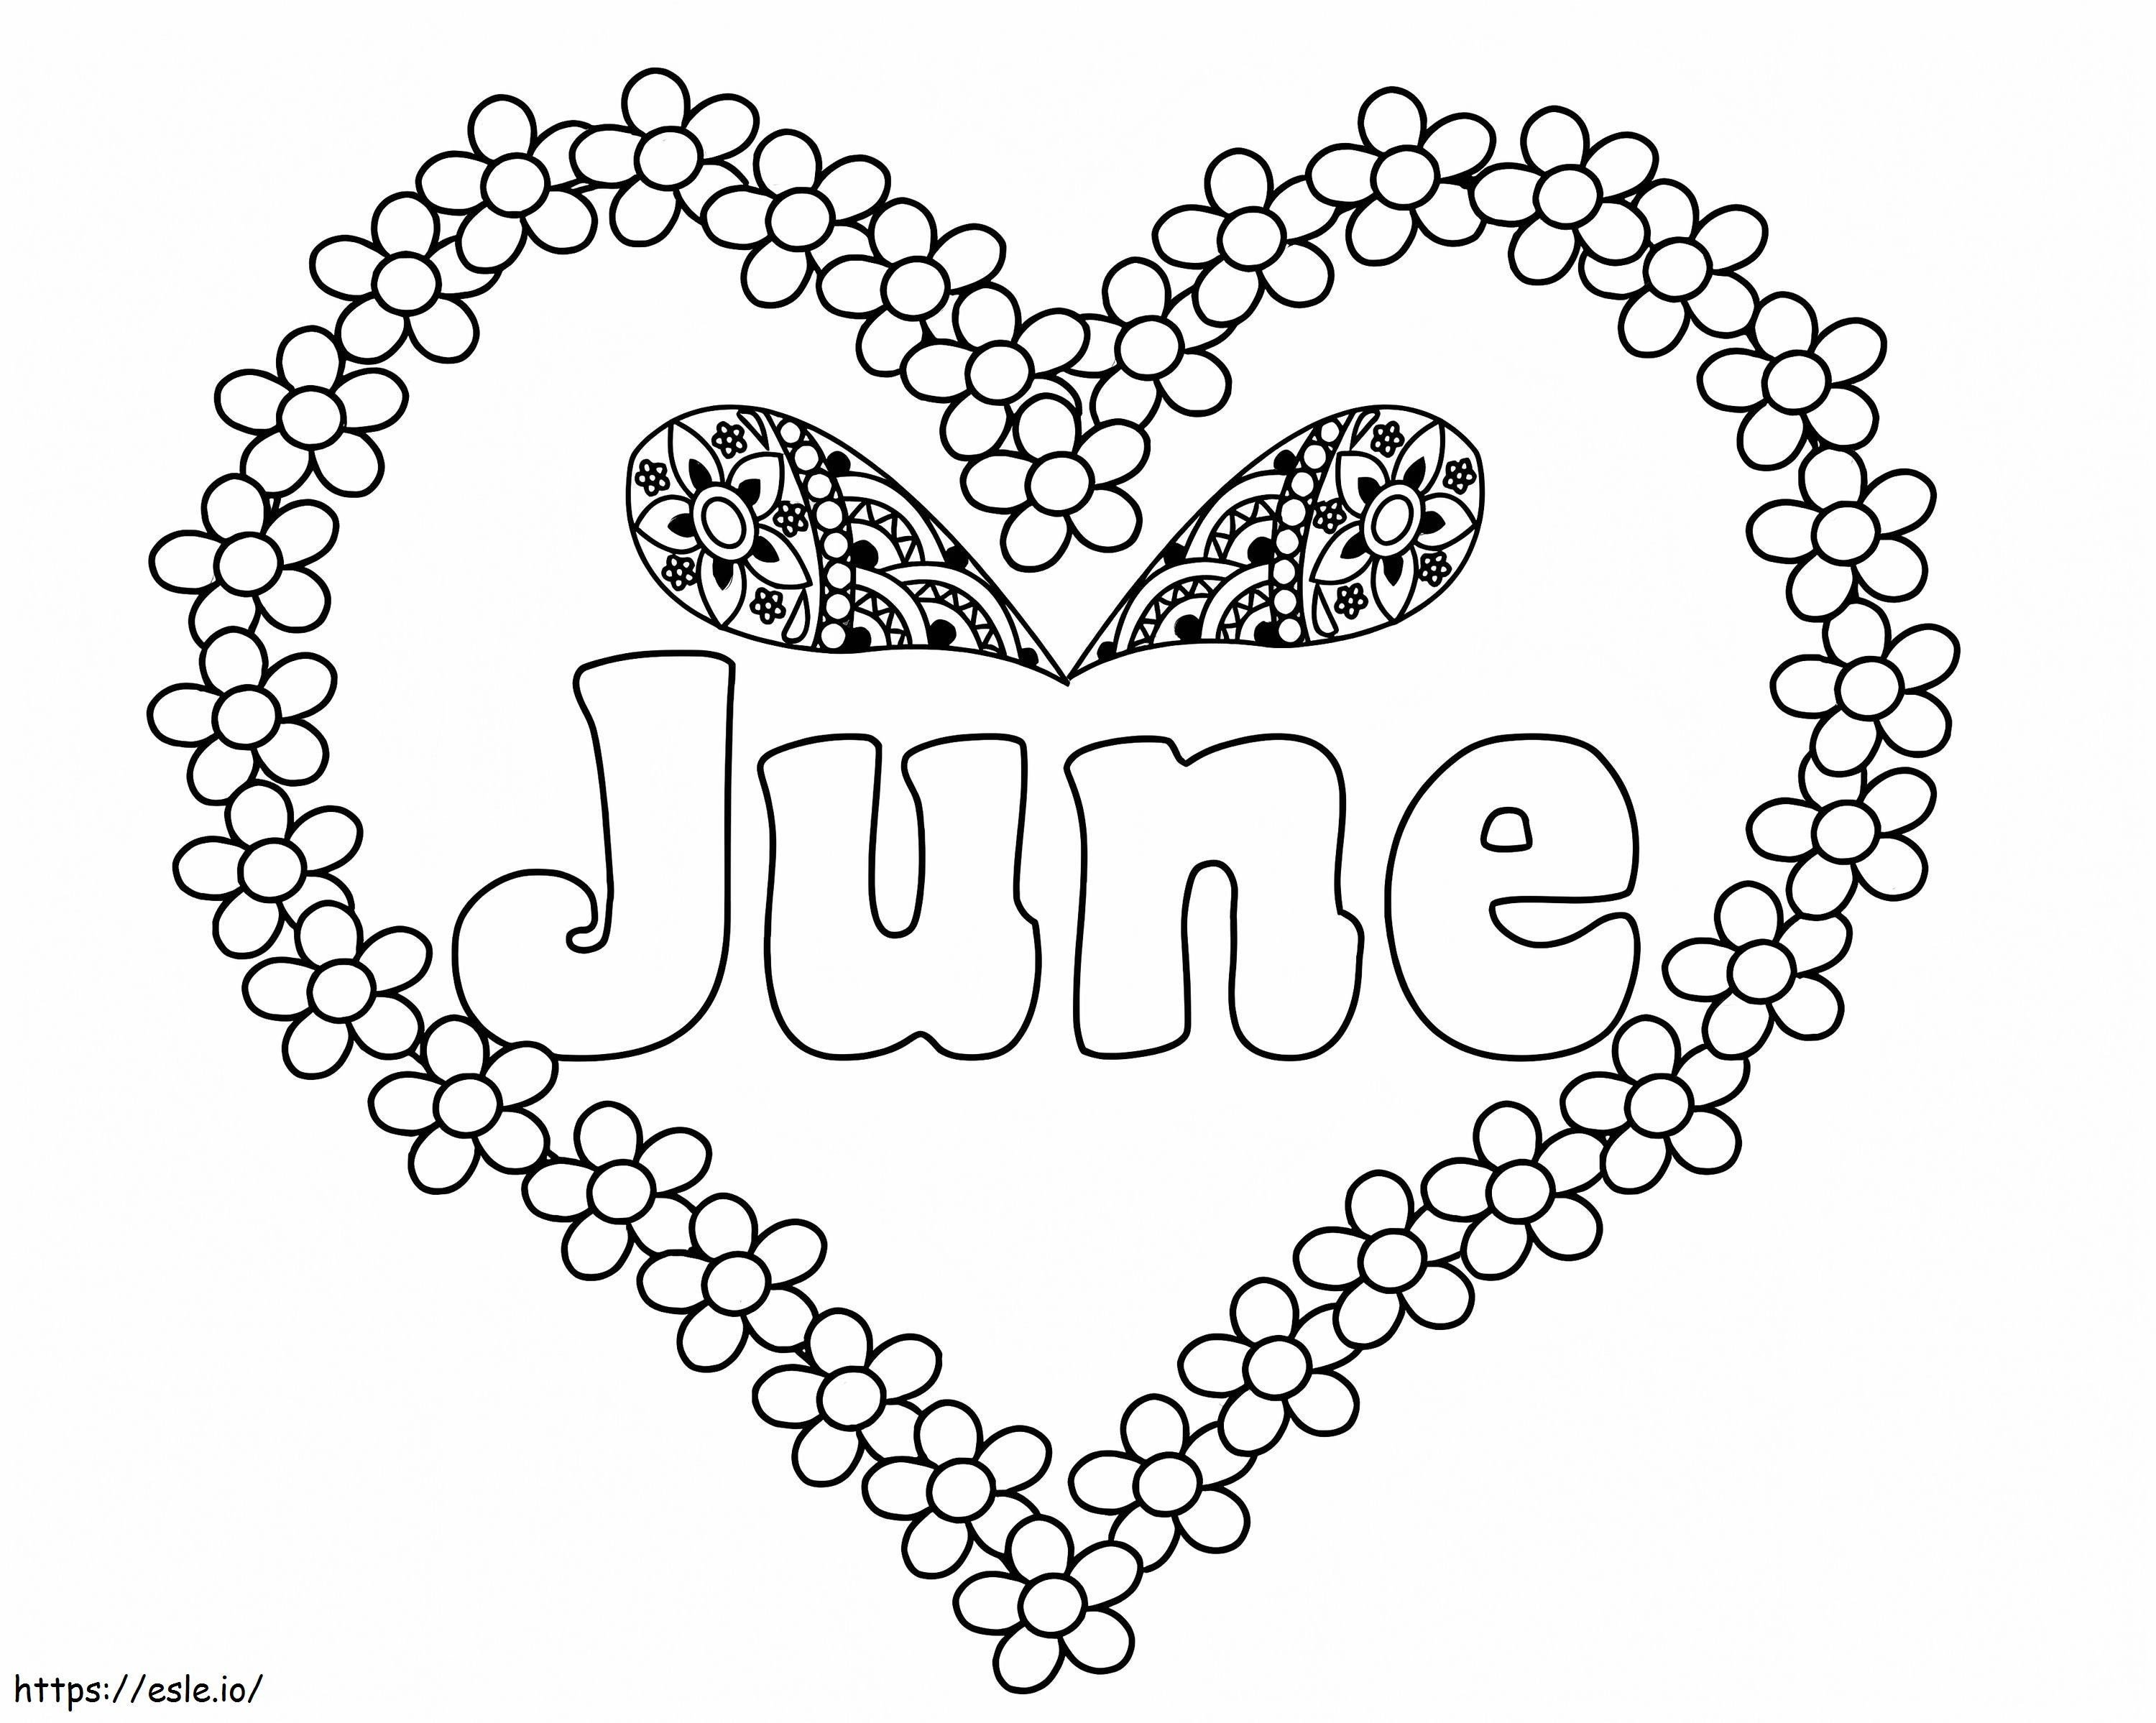 June With Heart coloring page